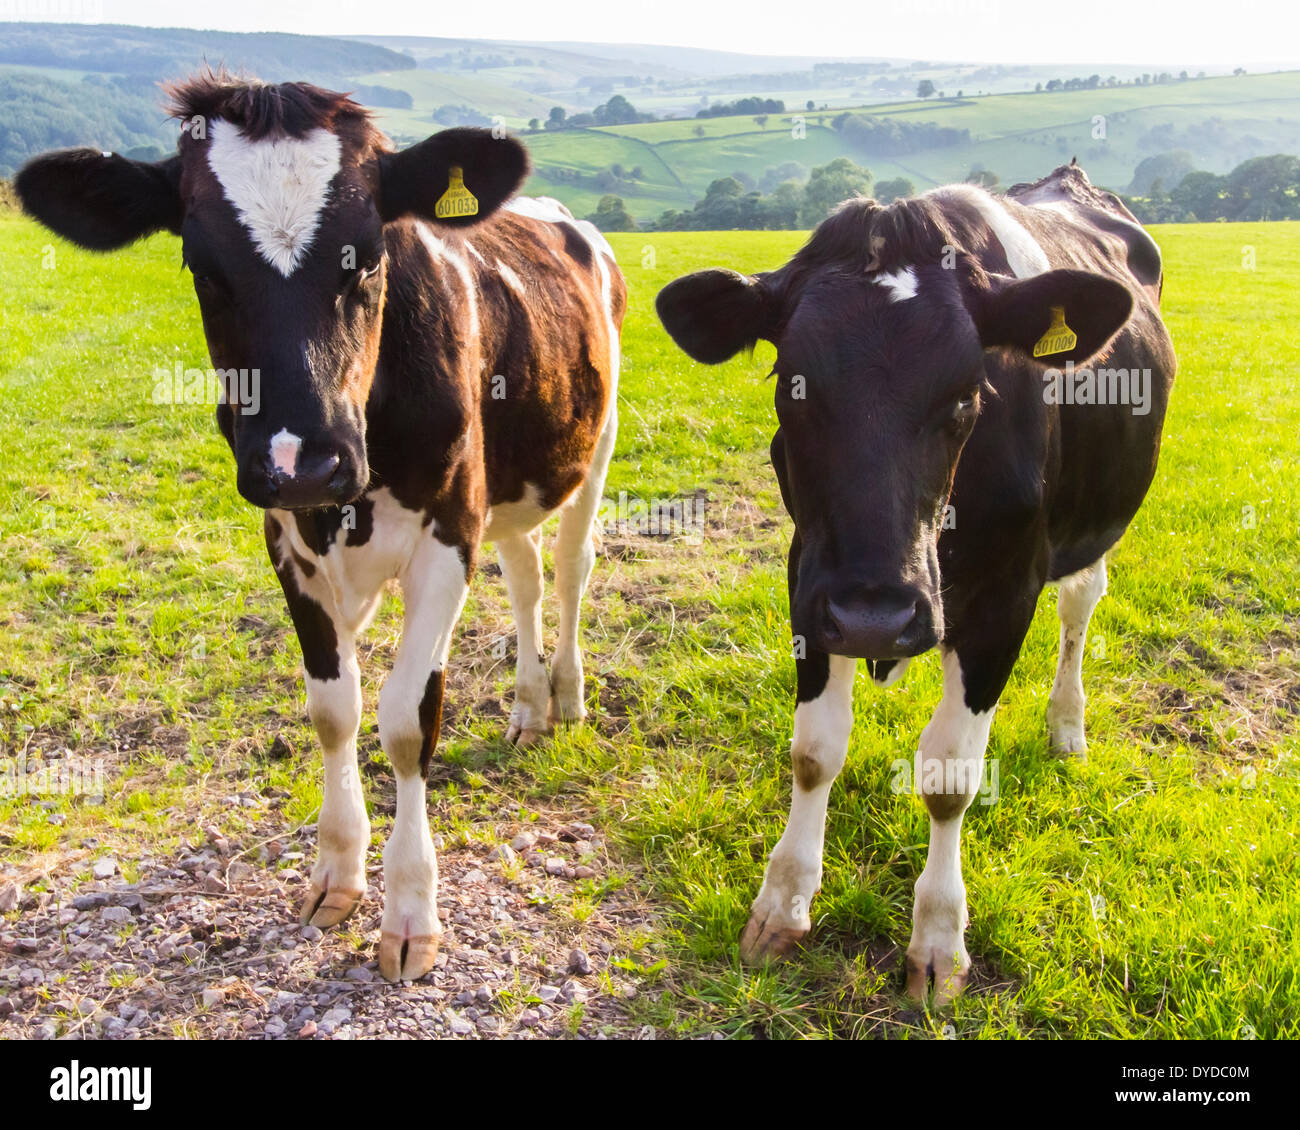 Two inquisitive calves. Stock Photo